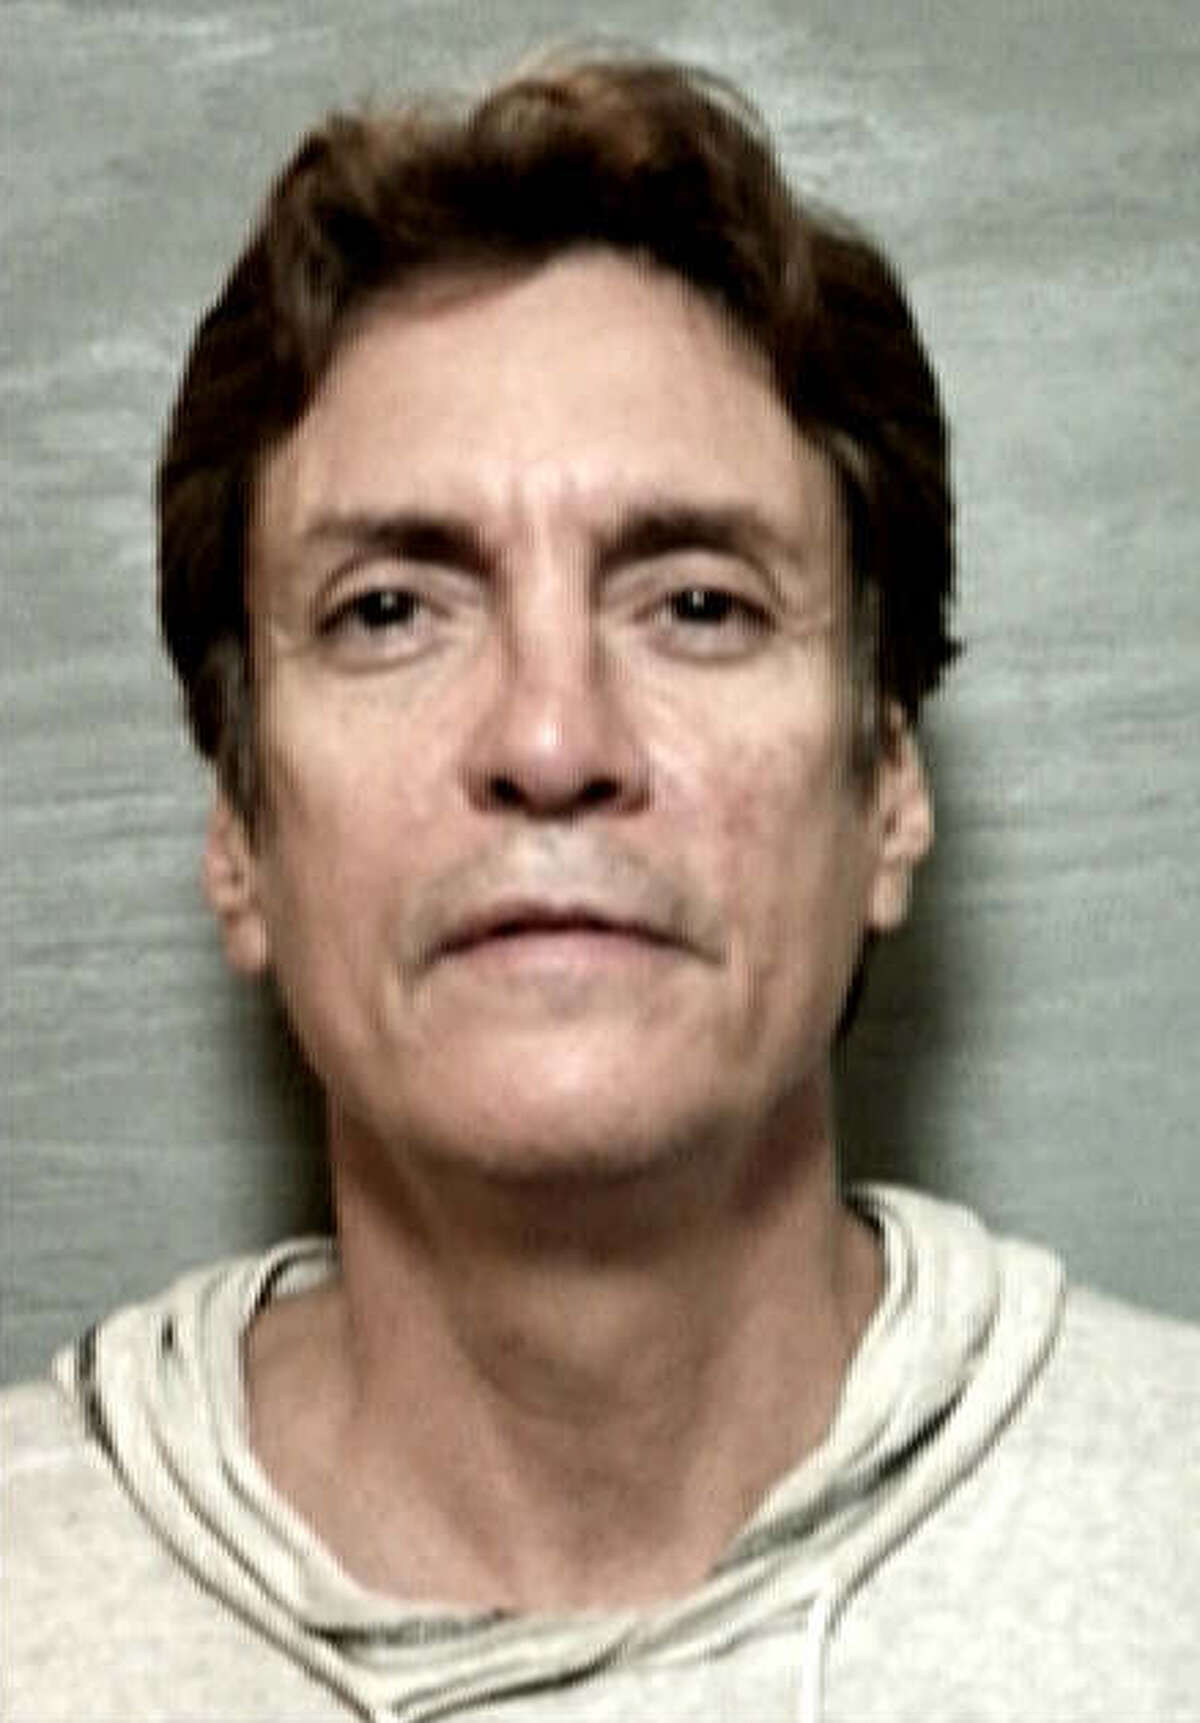 Registered sex offender Andrew Sanchez III, 60, is accused of taking photographs of youth performers at a cheerleading contest at the Alamodome.